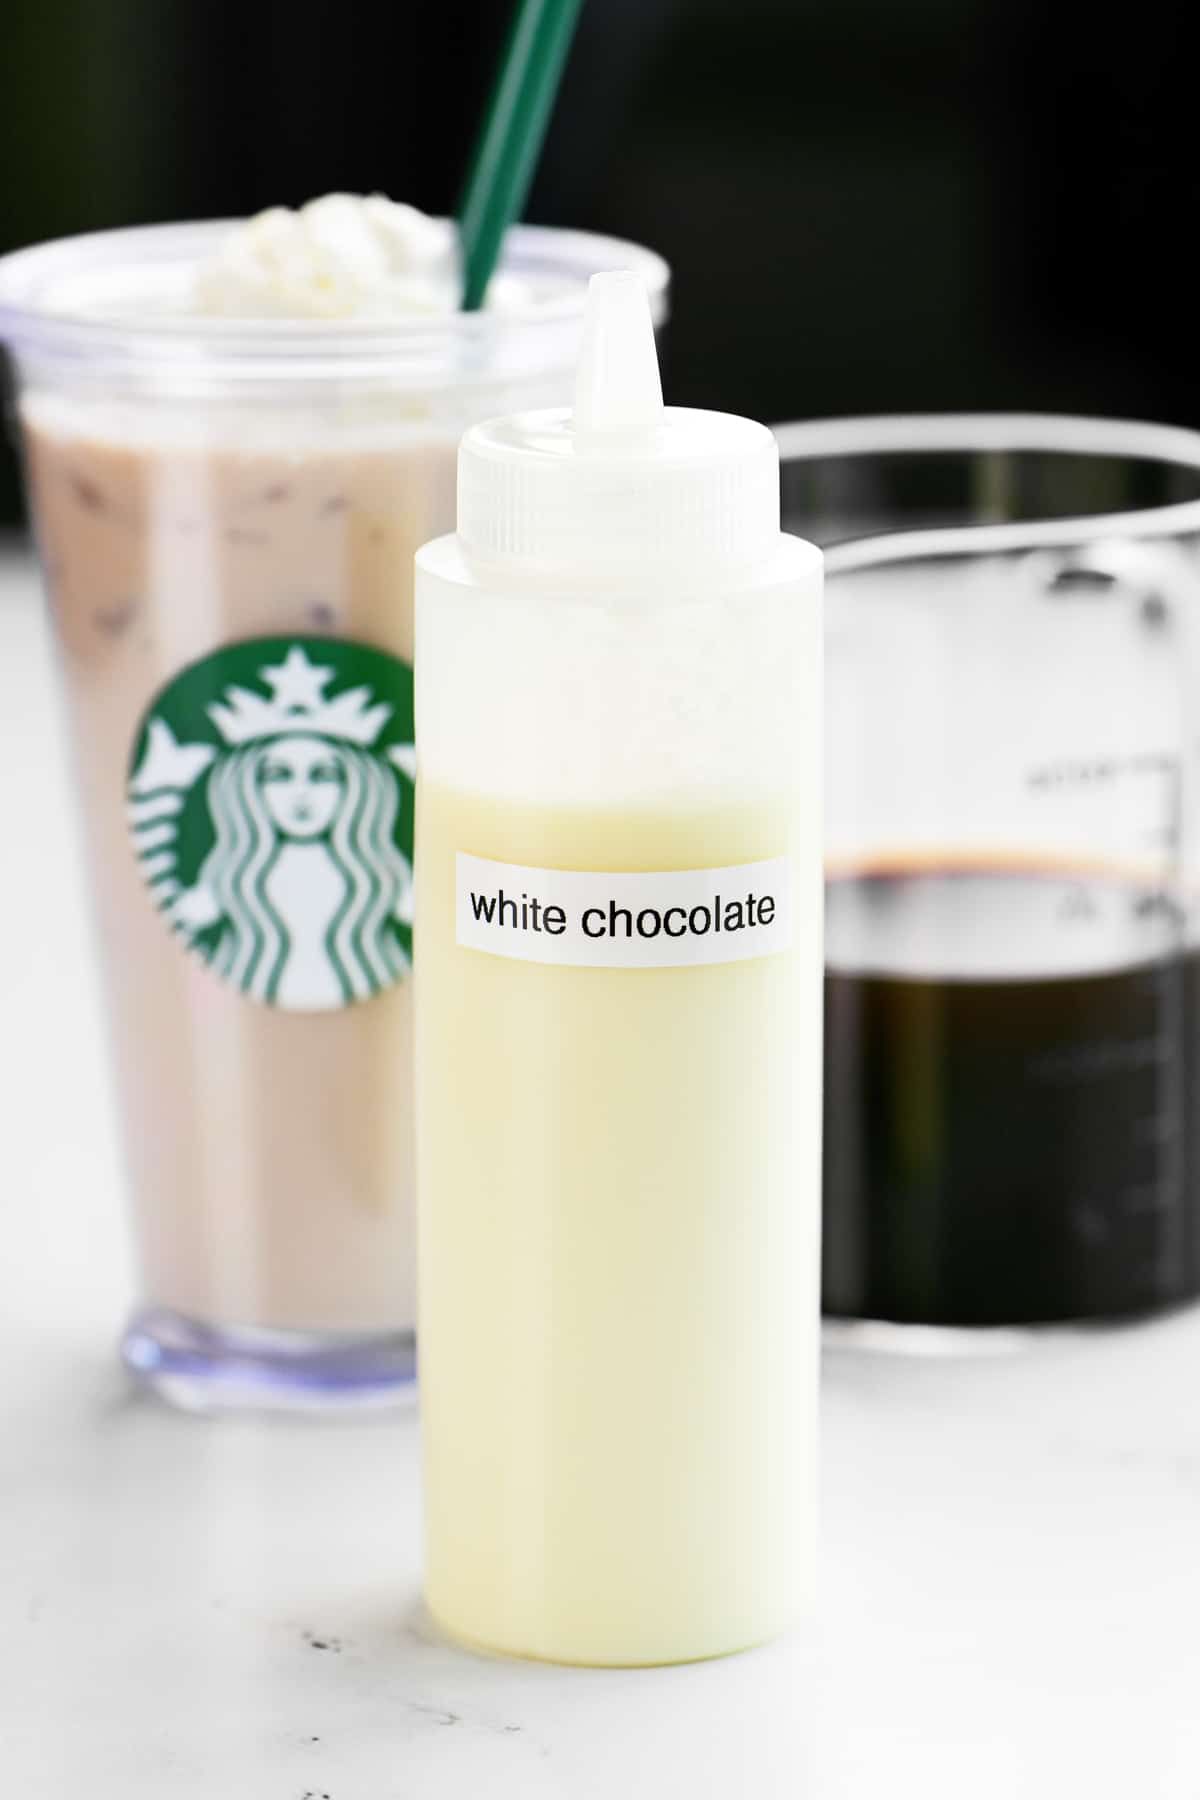 White chocolate sauce with a Starbucks cup and iced coffee.